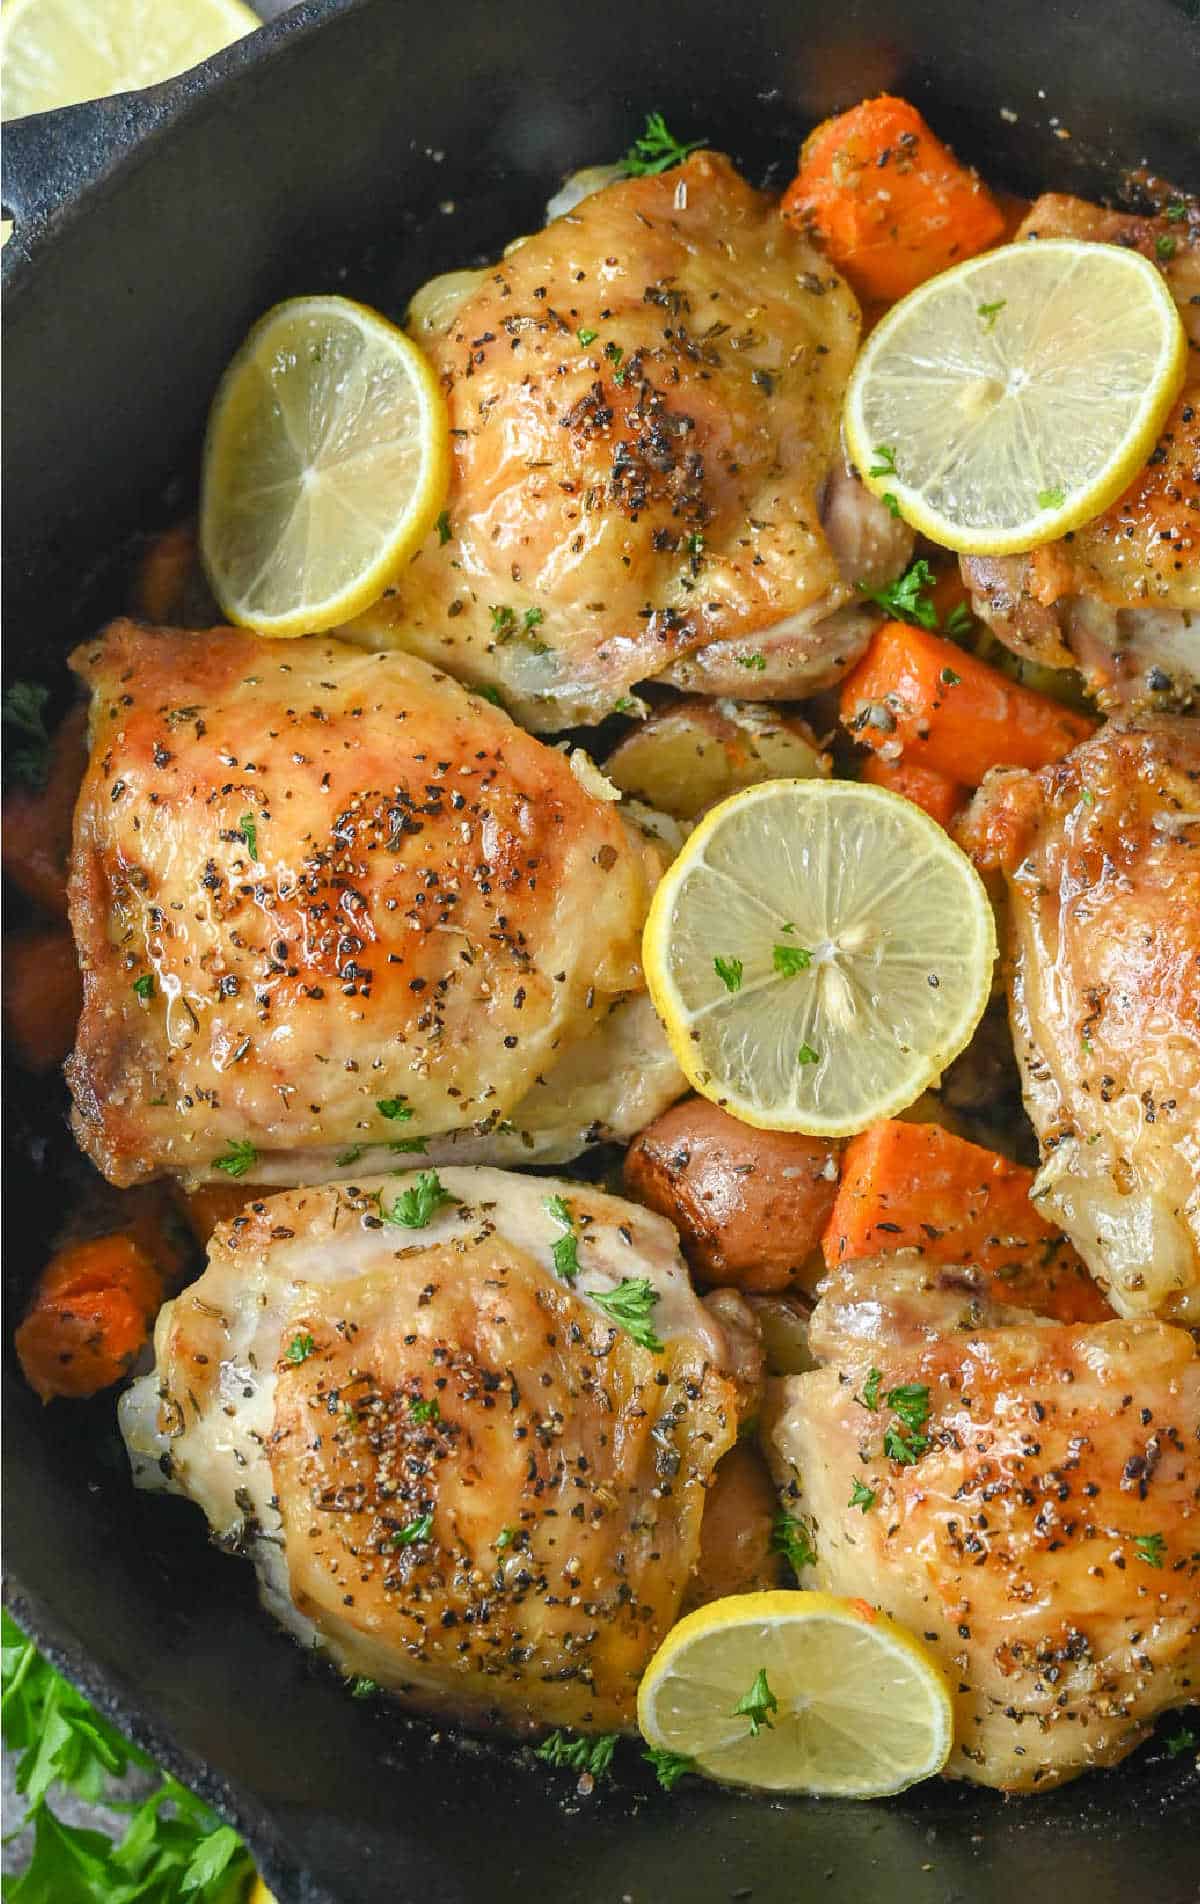 Chicken thighs roasted on top of potatoes and carrots in a pot.